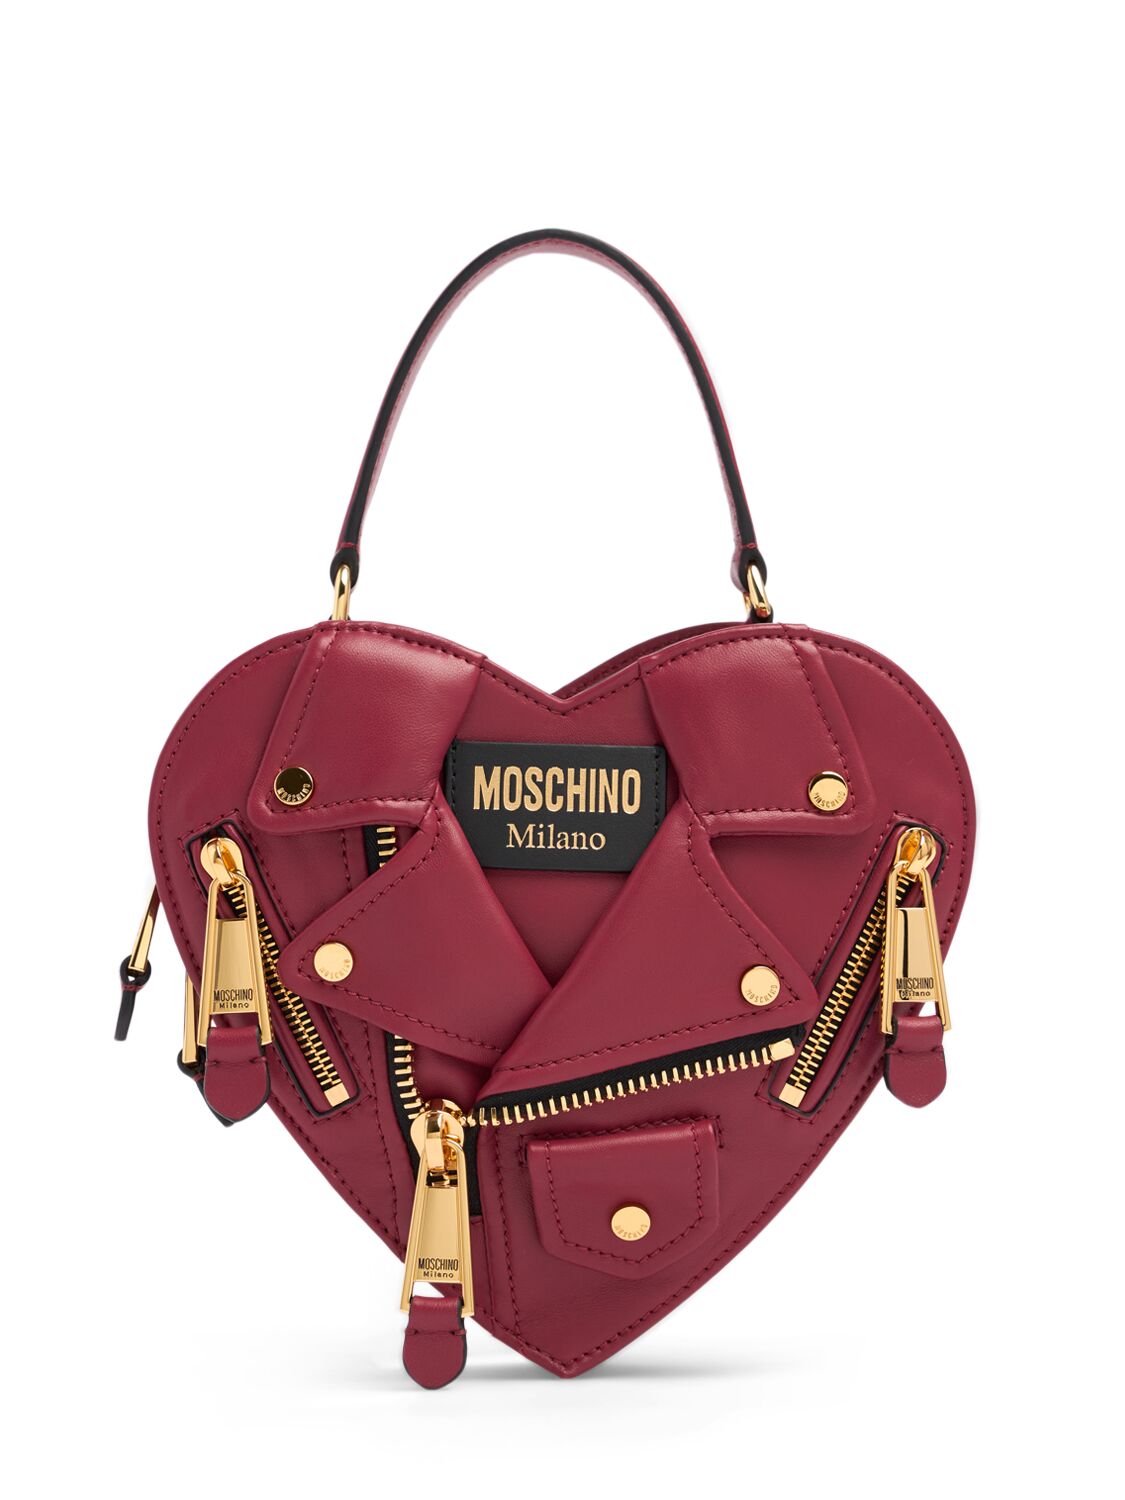 Moschino Biker Napa Leather Top Handle Bag In Violet